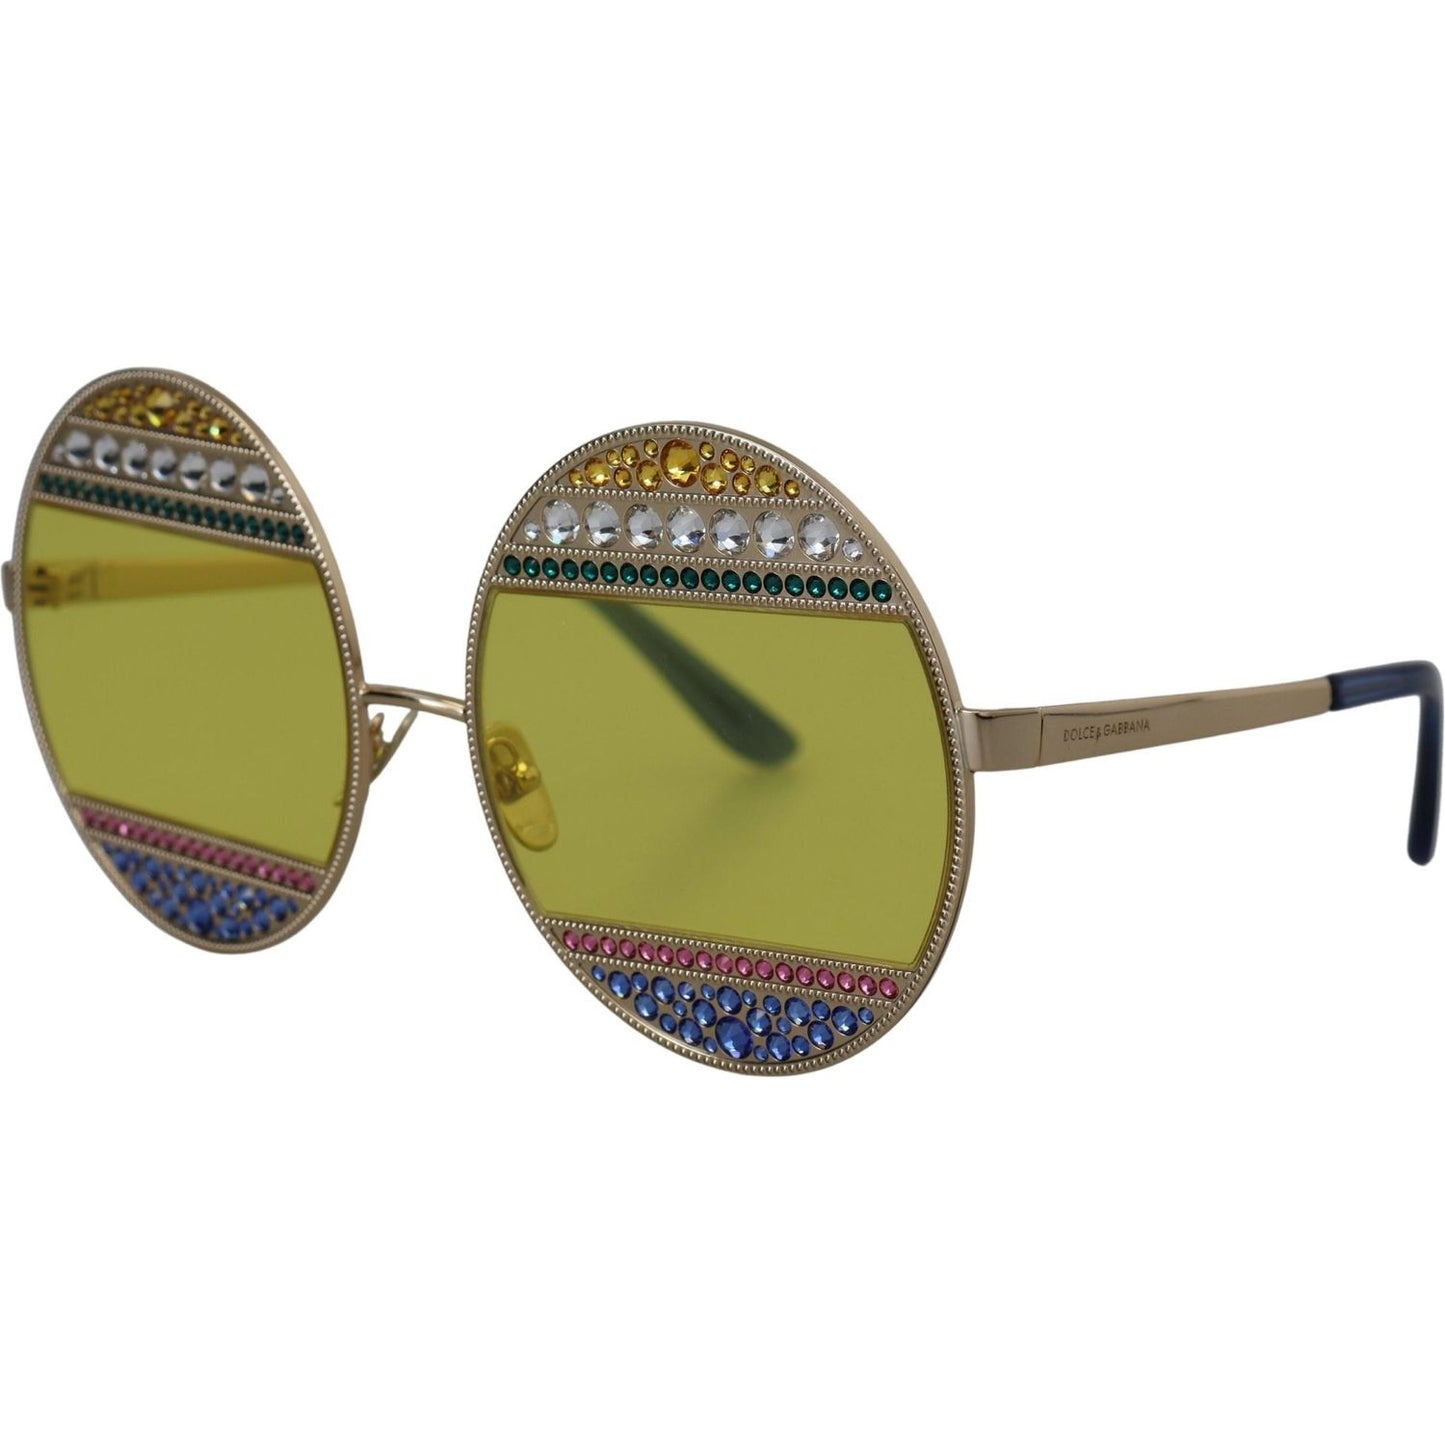 Dolce & Gabbana Crystal Embellished Gold Oval Sunglasses gold-oval-metal-crystals-shades-dg2209b-sunglasses